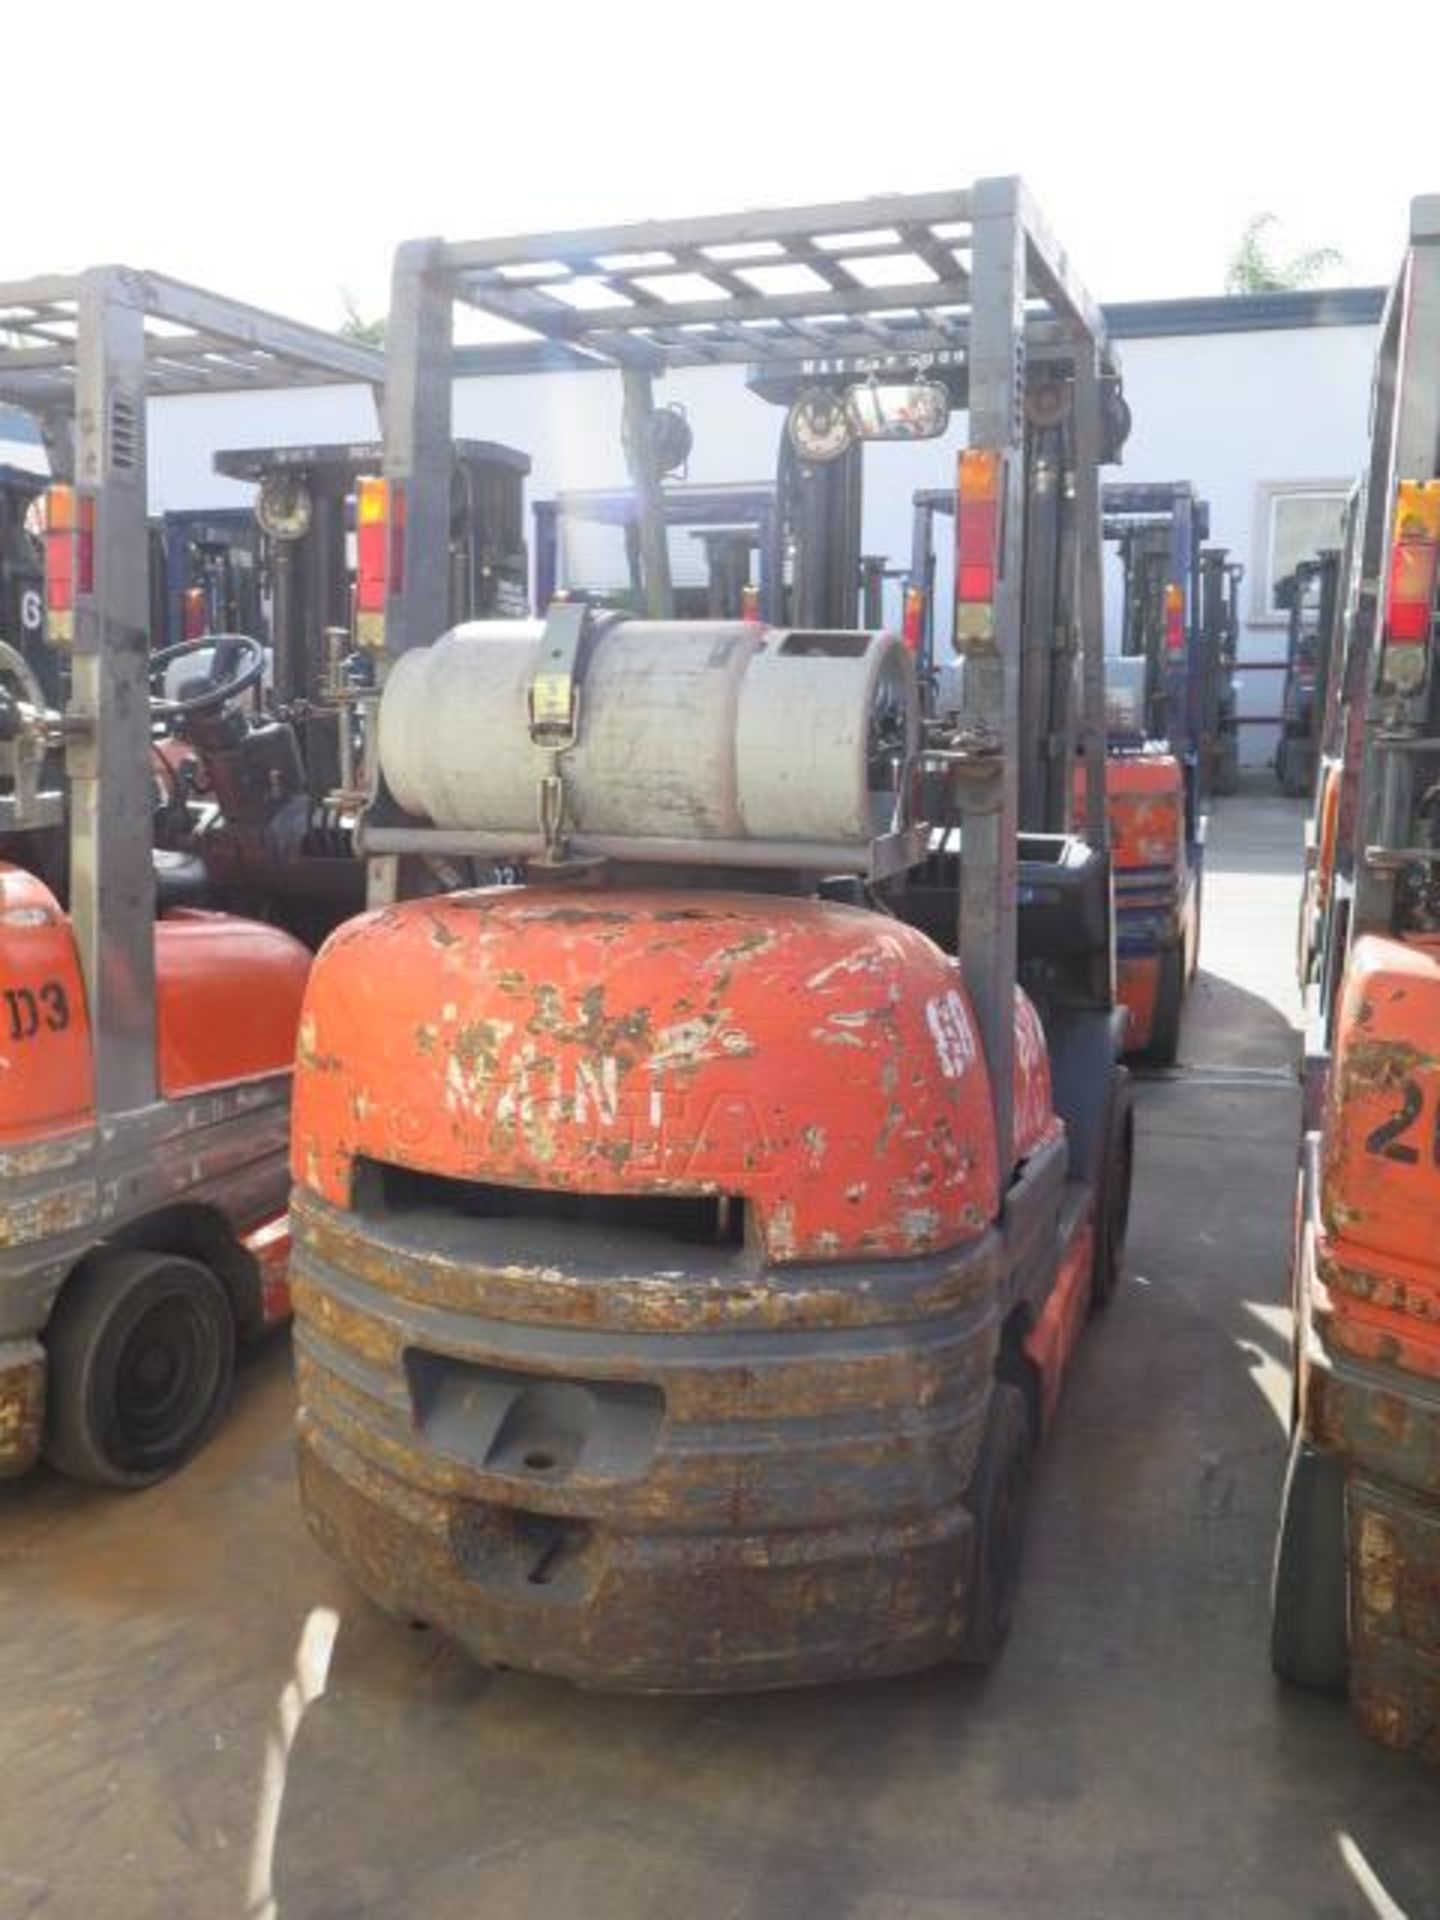 Toyota 42-6FGCU25 5000 Lb Cap LPG Forklift s/n 68195 w/ 3-Stage Mast, 189" Lift Height, Cushion - Image 3 of 11